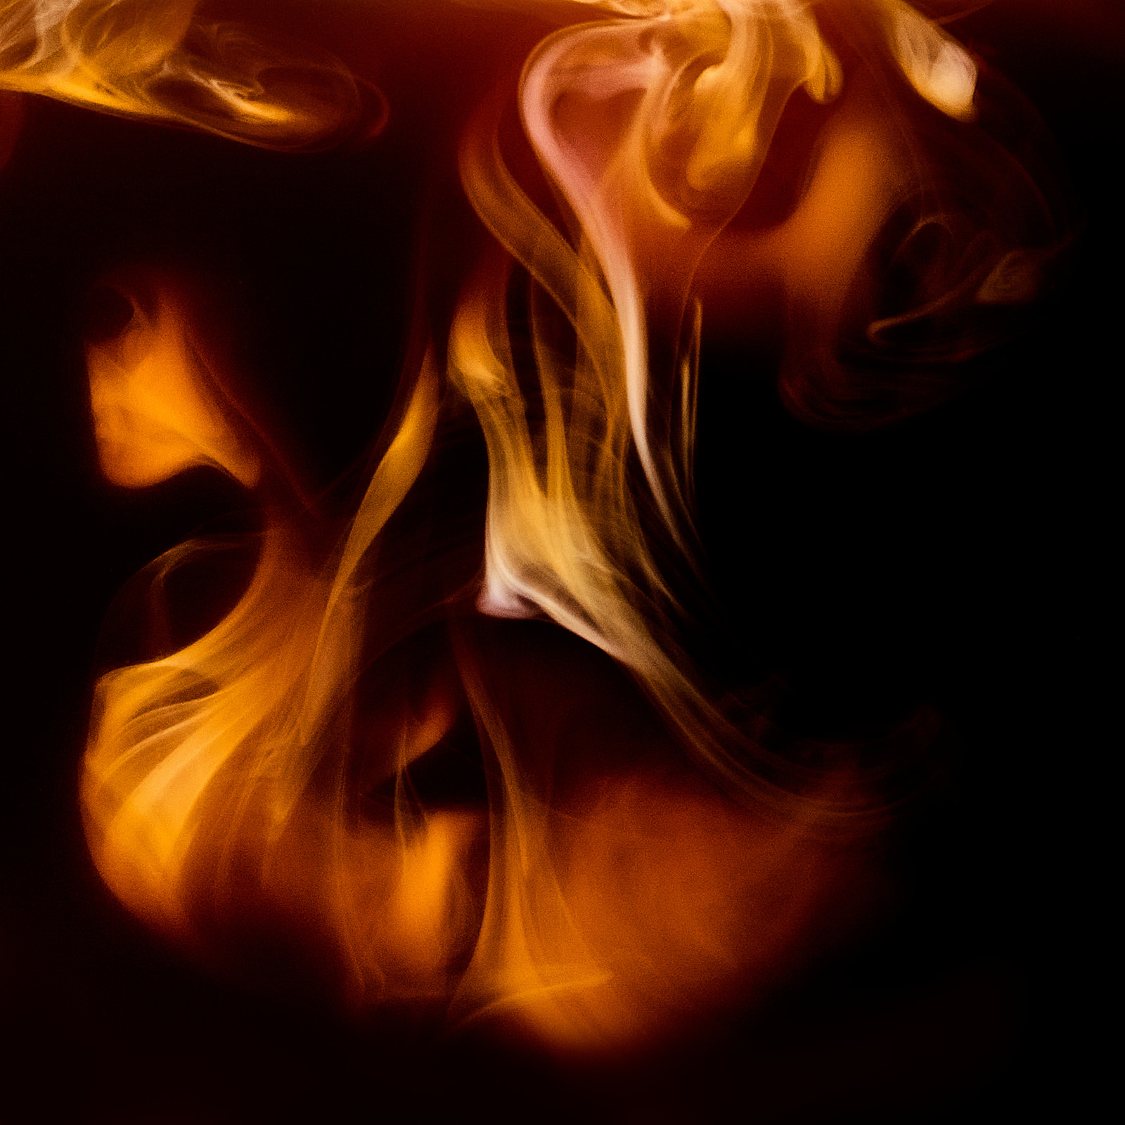 Coffee with milk flames close up